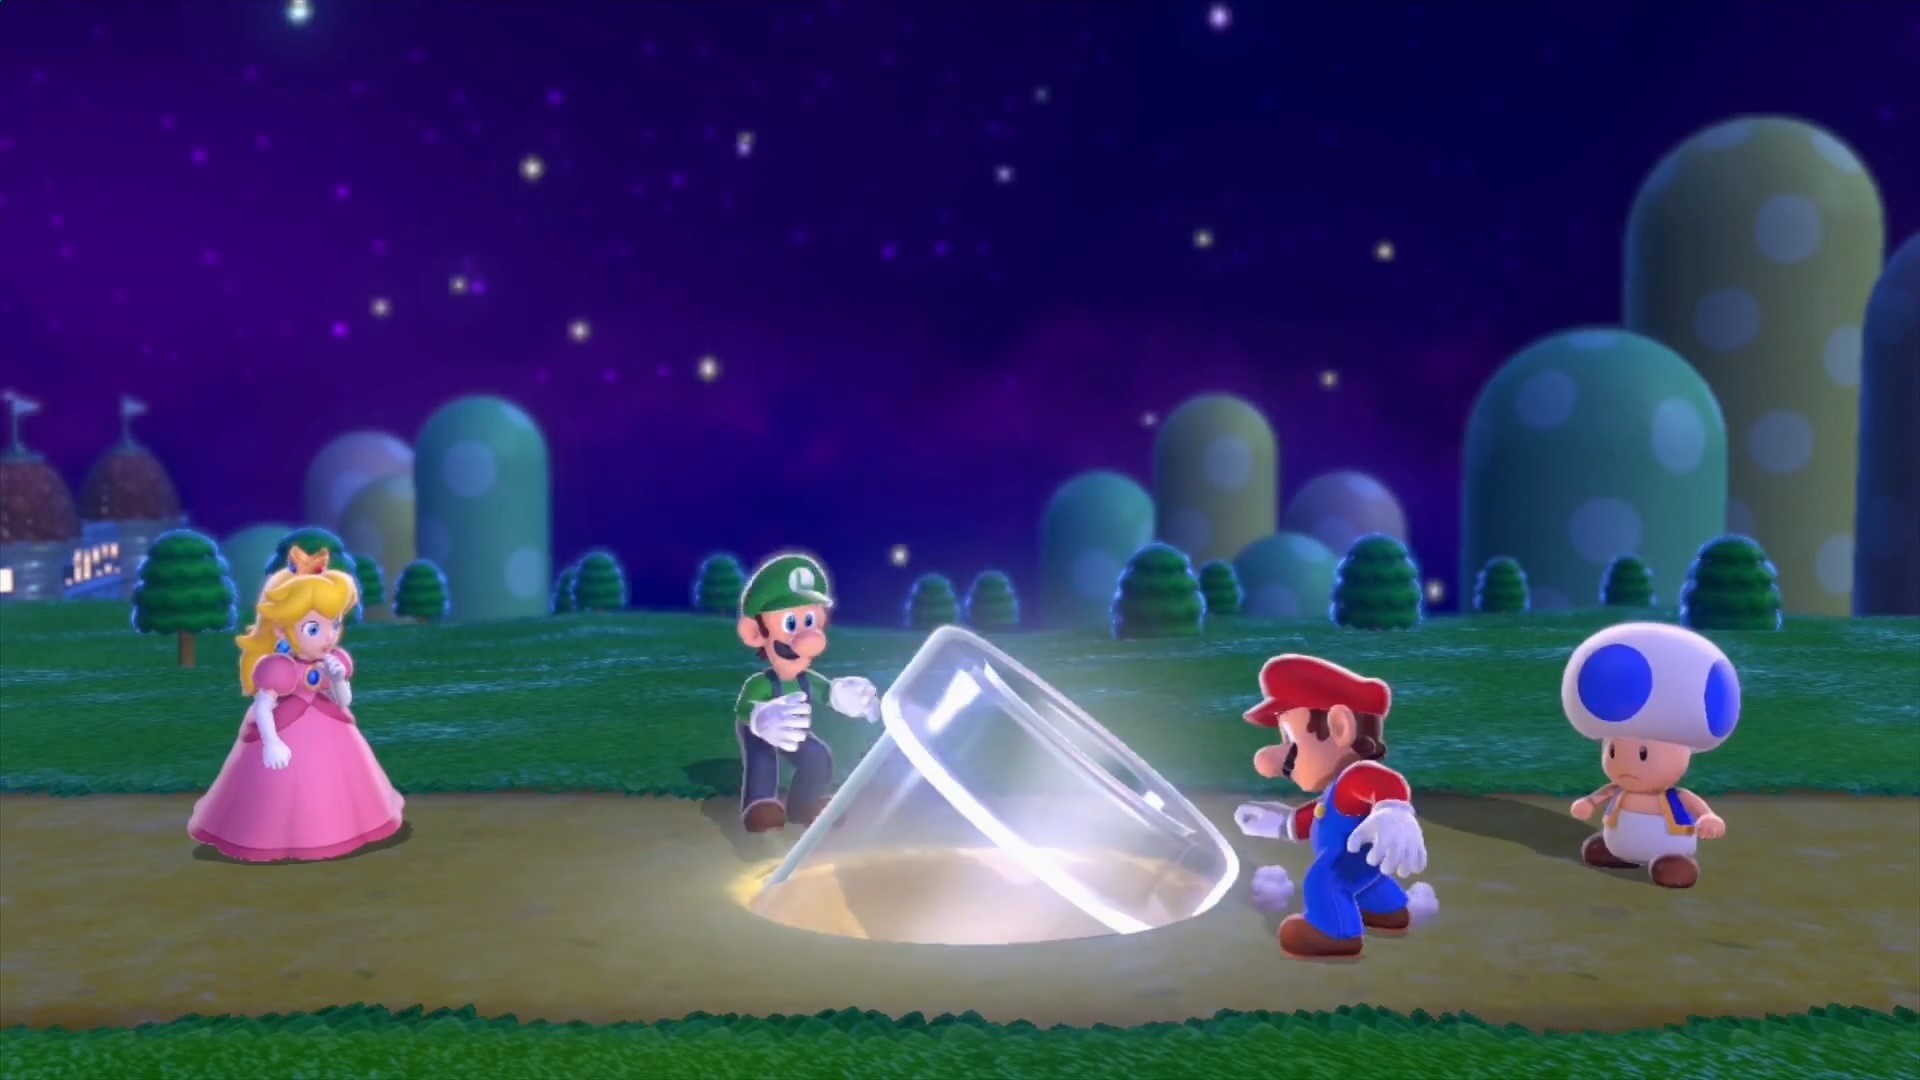 … wallpaper abyss; the new super mario 3d world trailer shows off  colorful 3d gameplay …